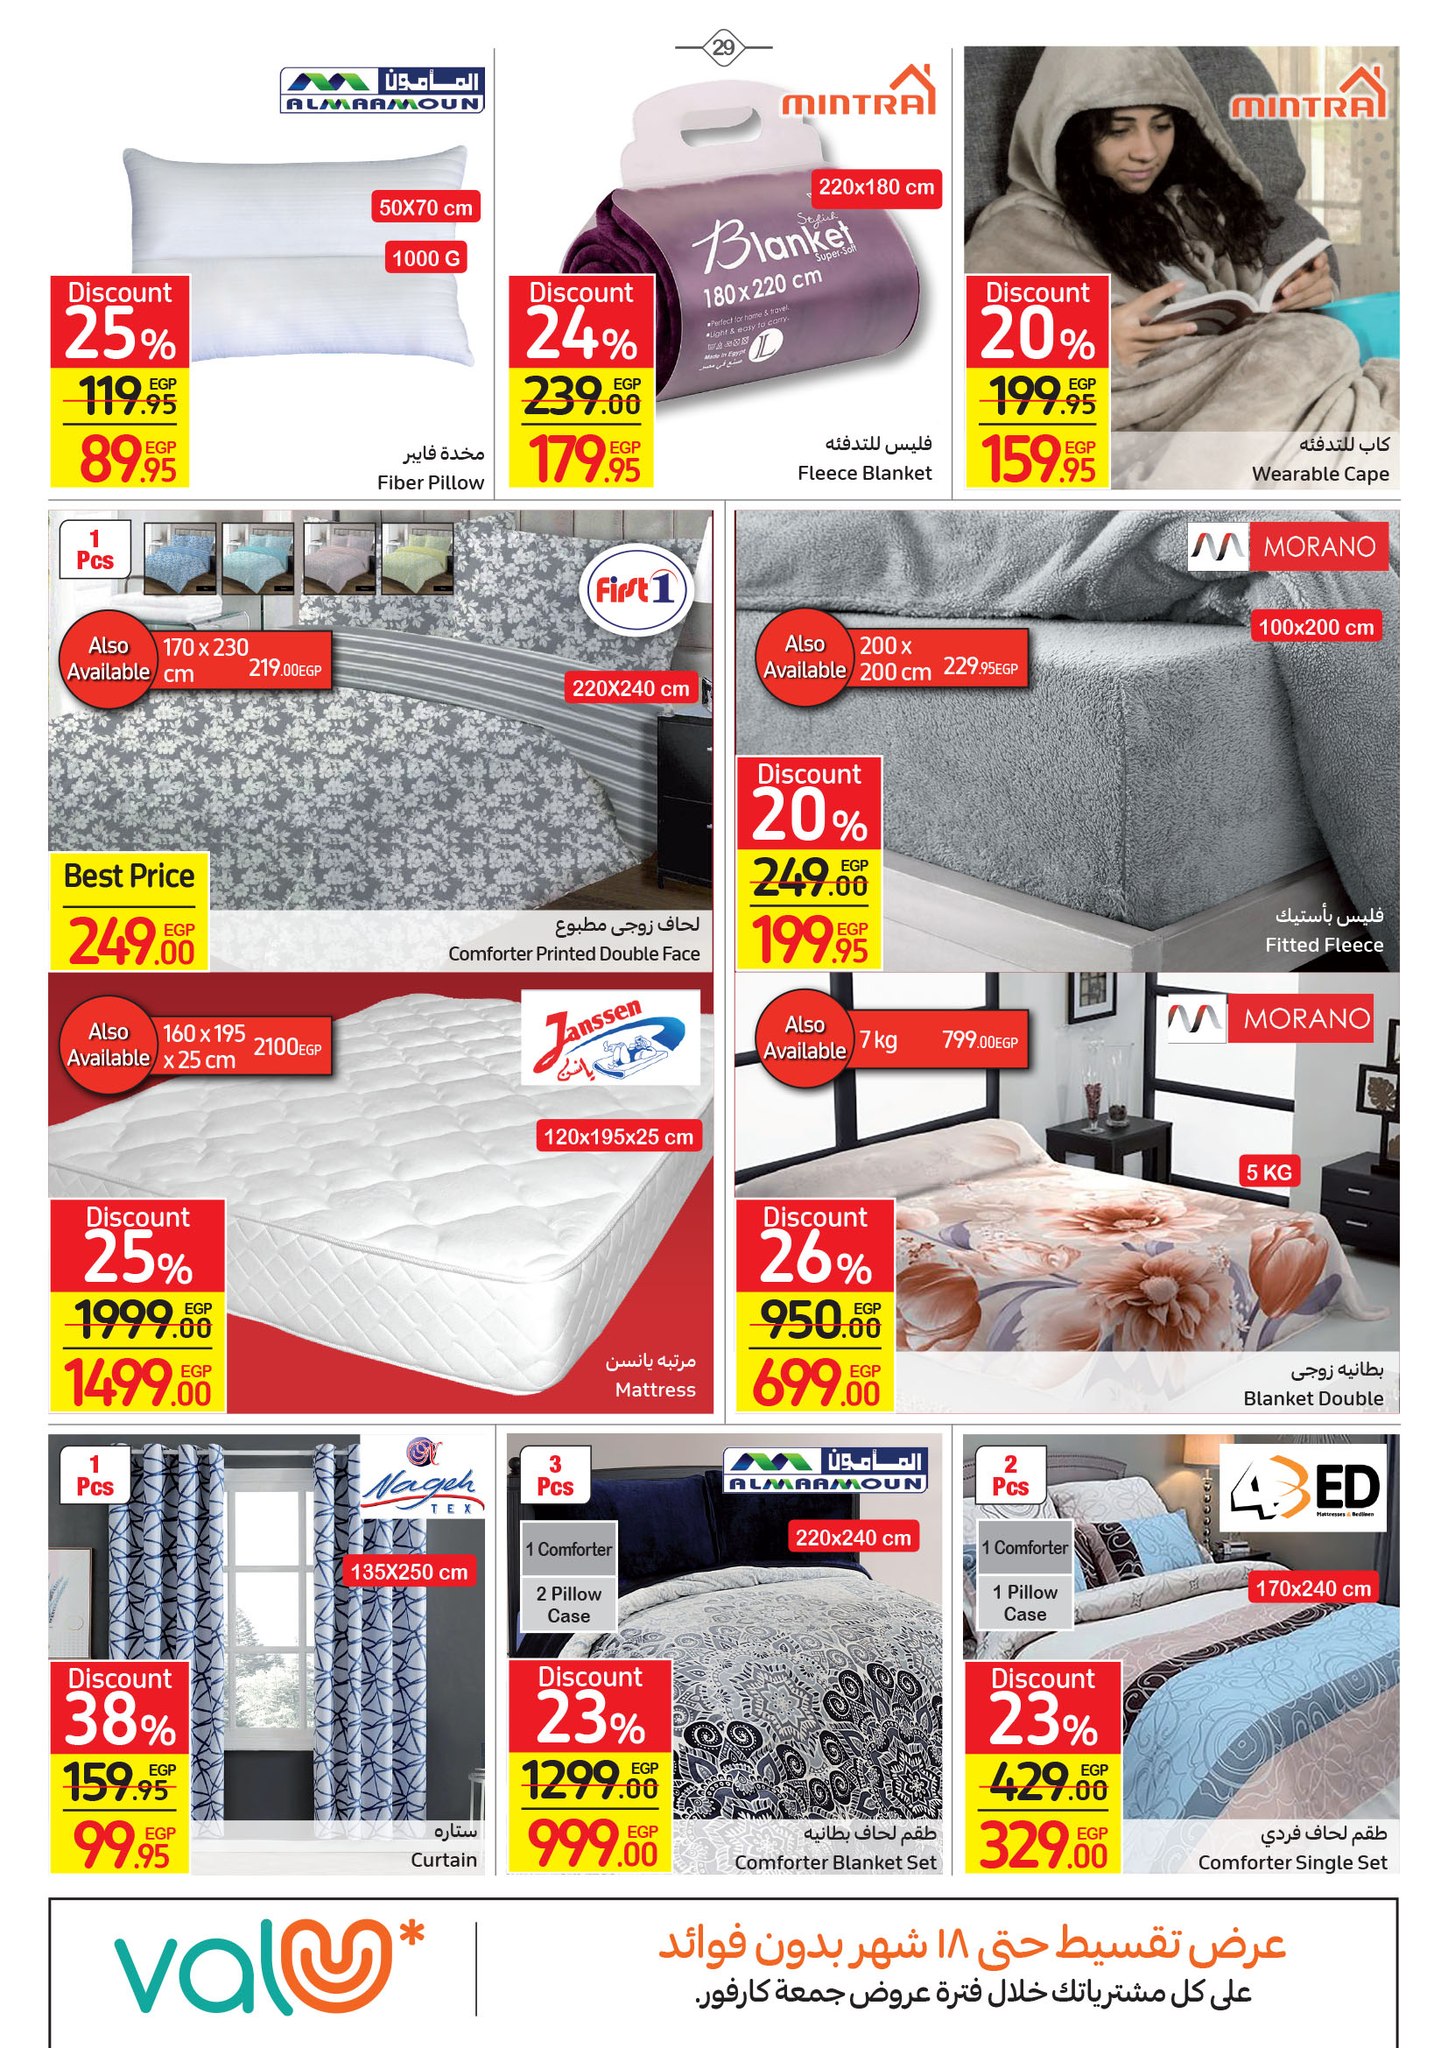 Watch the latest Carrefour half price offers "Last Chance Offer" until December 4 29